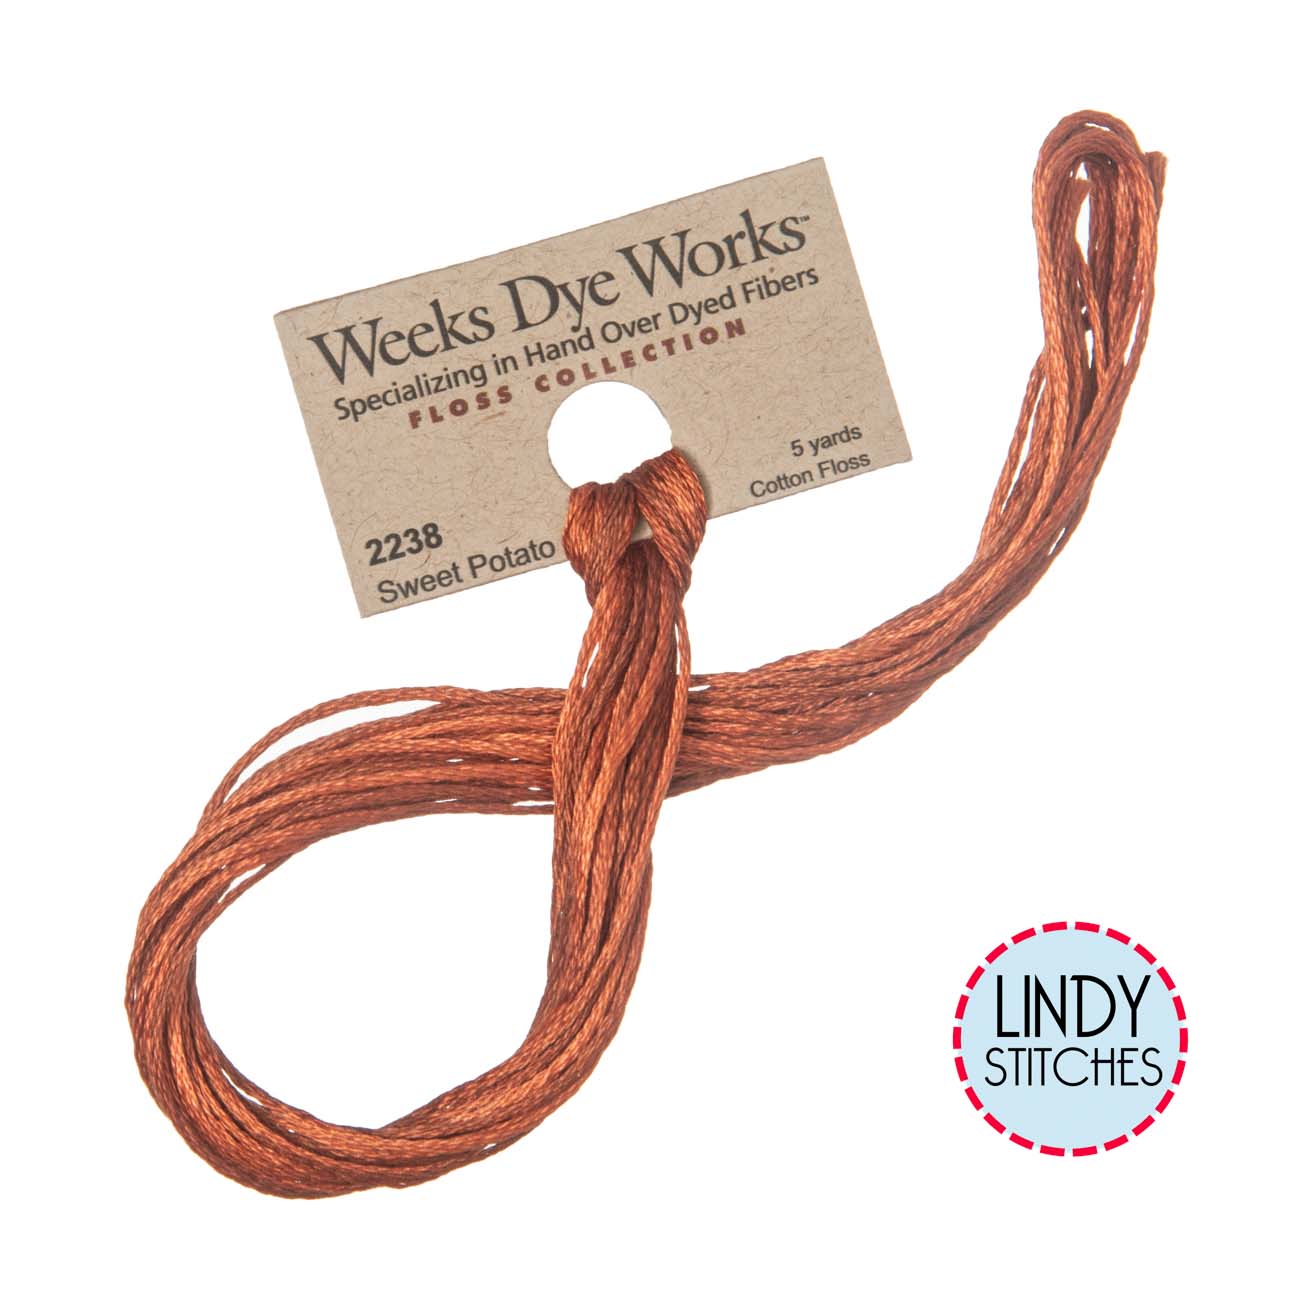 Sweet Potato Weeks Dye Works Floss Hand Dyed Cotton Skein 2238